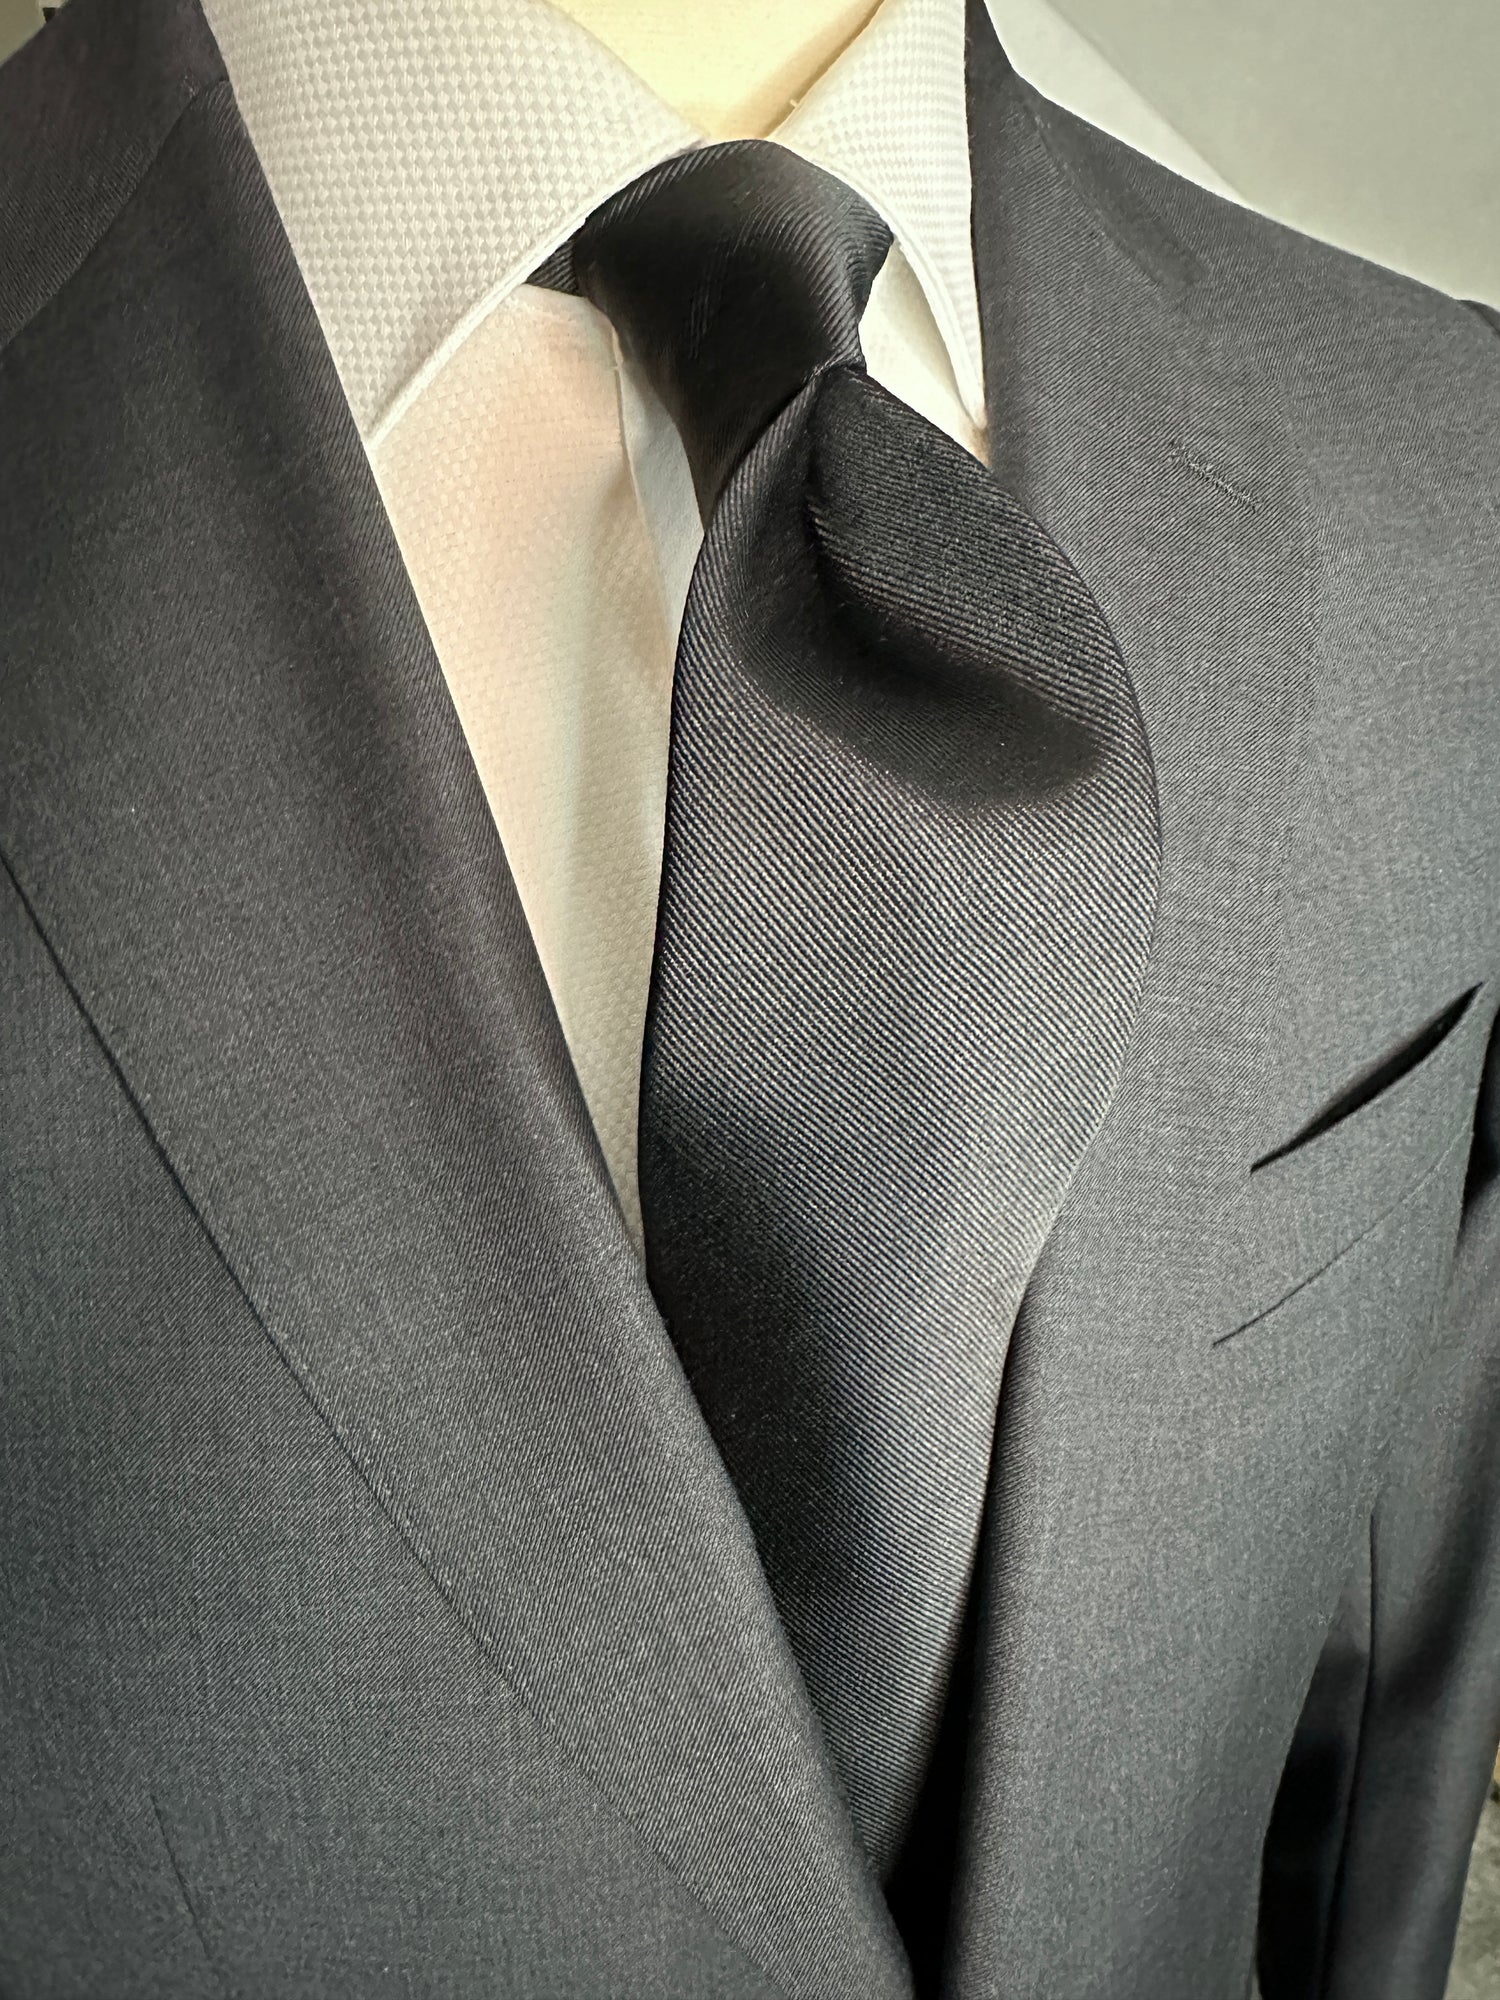 This 100% silk twill woven tie is perfect for those formal occasions and weddings. With a black suit or tuxedo this black tie holds a perfect knot since it is woven and twill together.